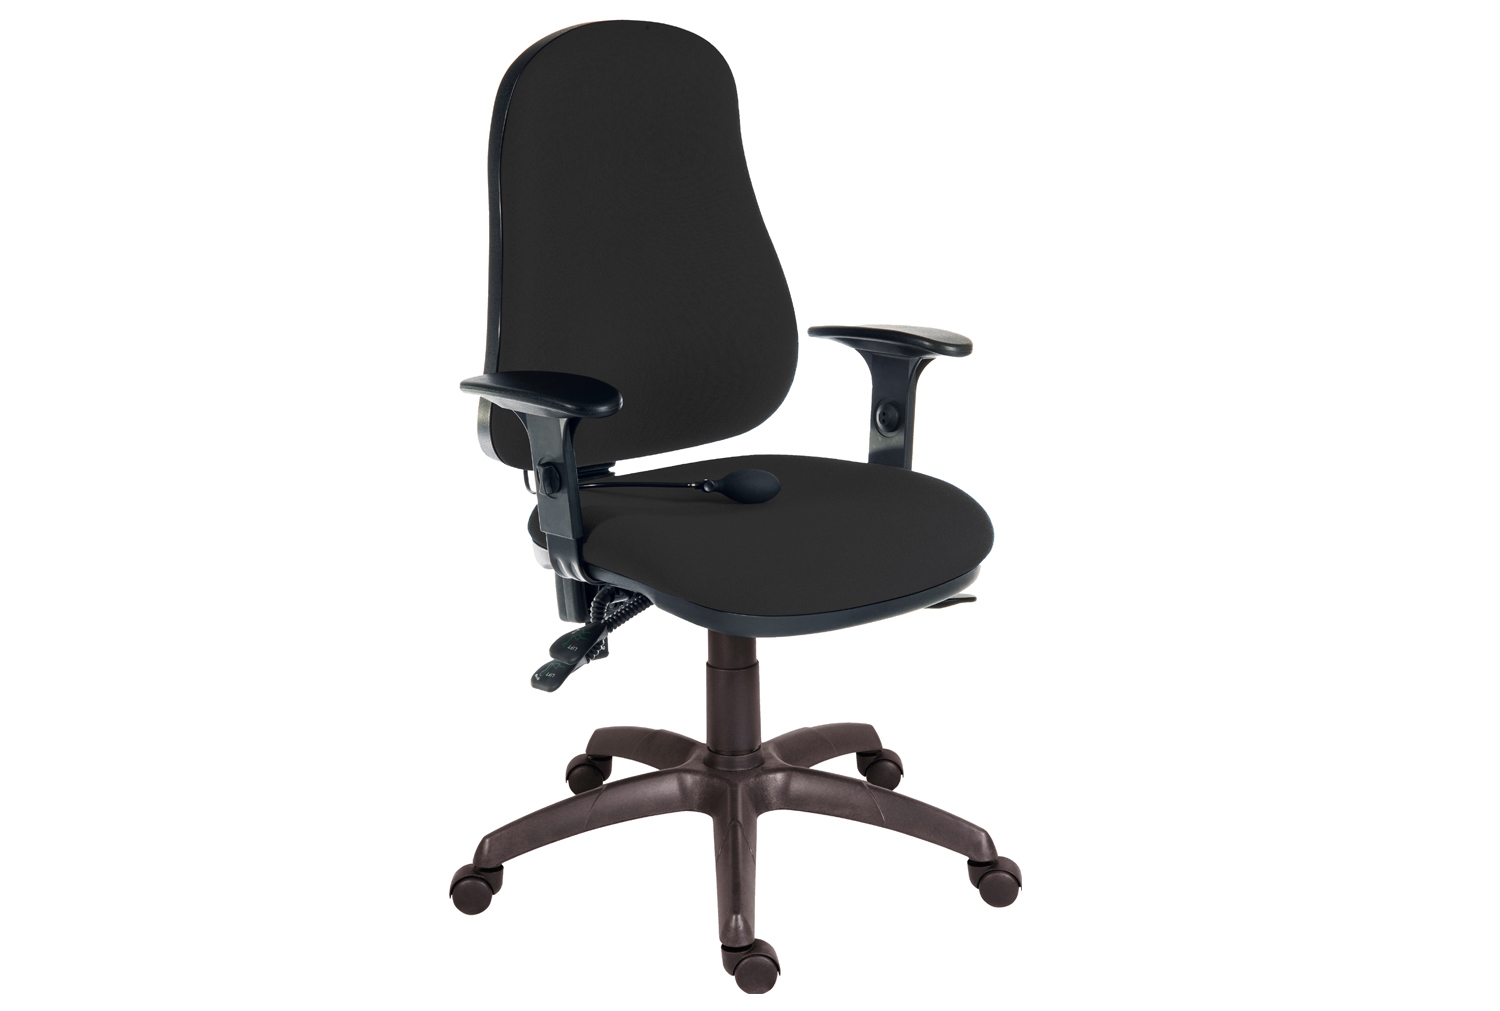 Comfort Ergo Air Operator Office Chair With Adjustable Arms (Fabric), Black, Fully Installed